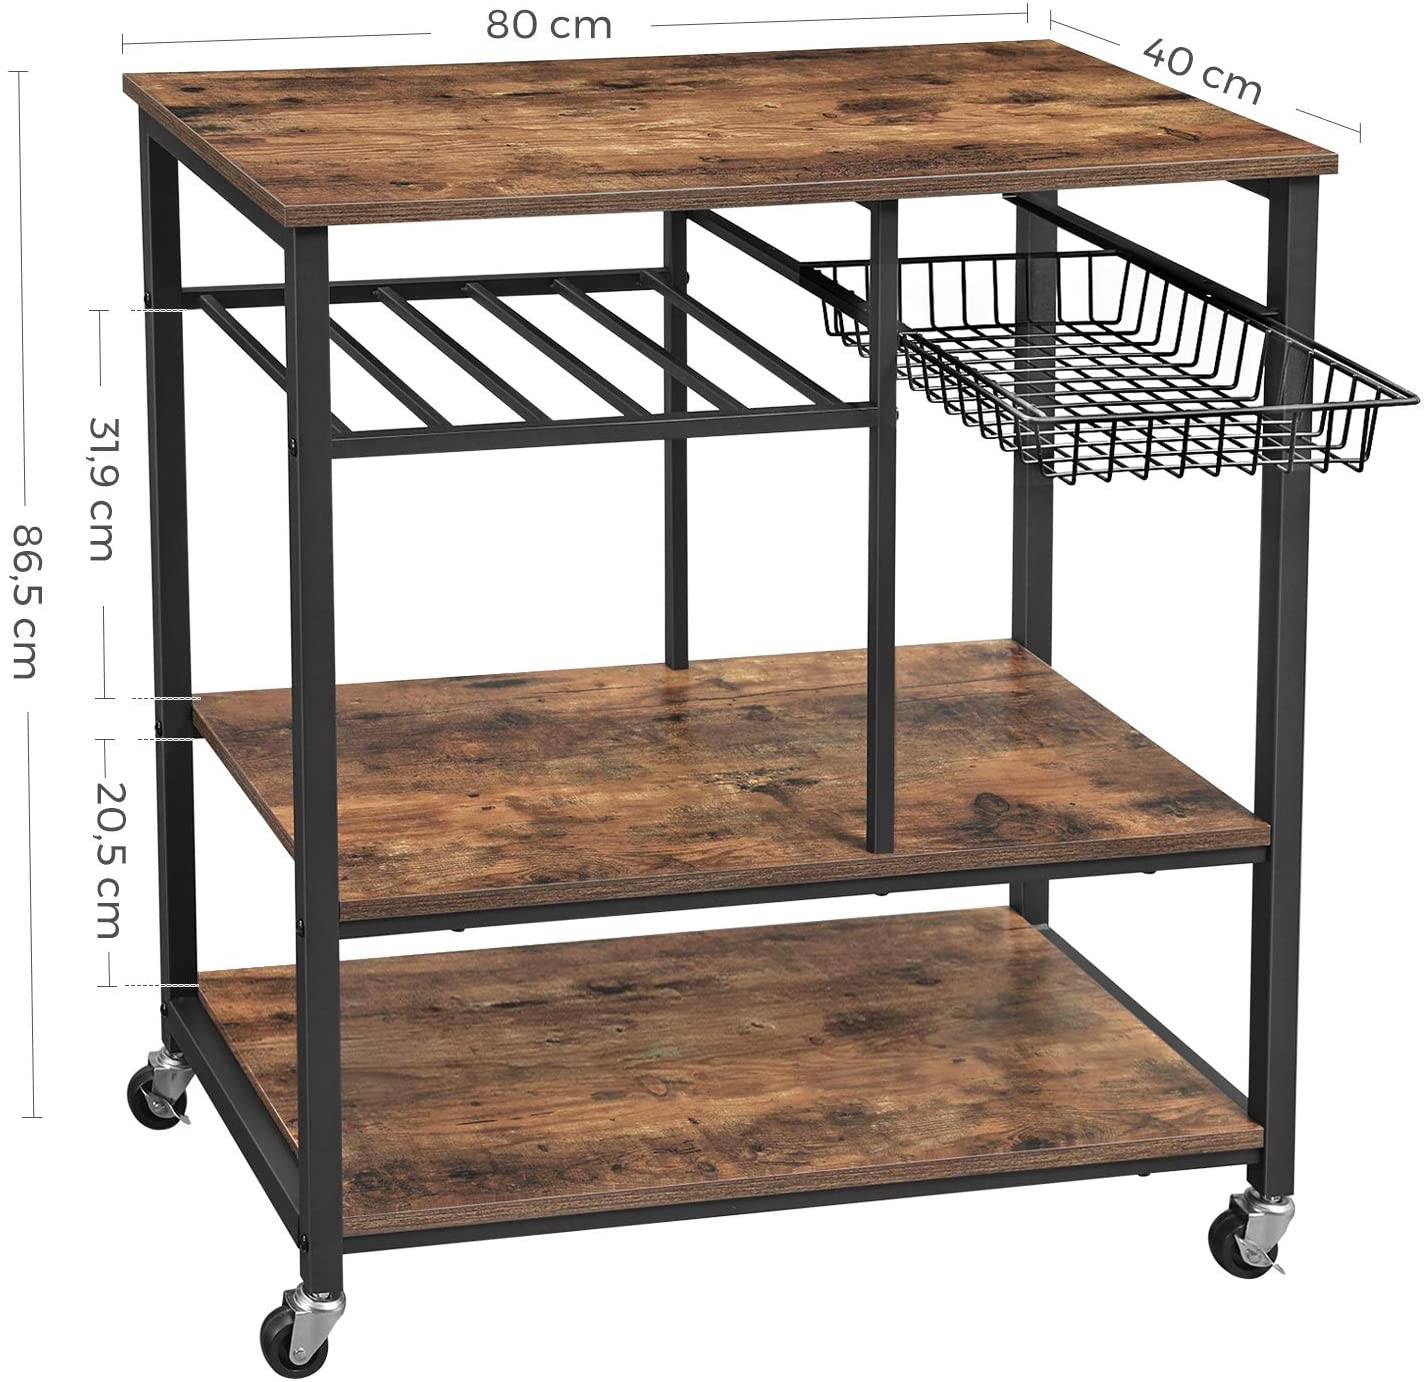 Baker? Rack with Wheels, Kitchen Island, Food Trolley with metal Mesh Basket, Bottle Holder and Storage Shelves, 80 x 40 x 86.5 cm, Industrial Style, Rustic Brown KKS80X RAW58.dk 